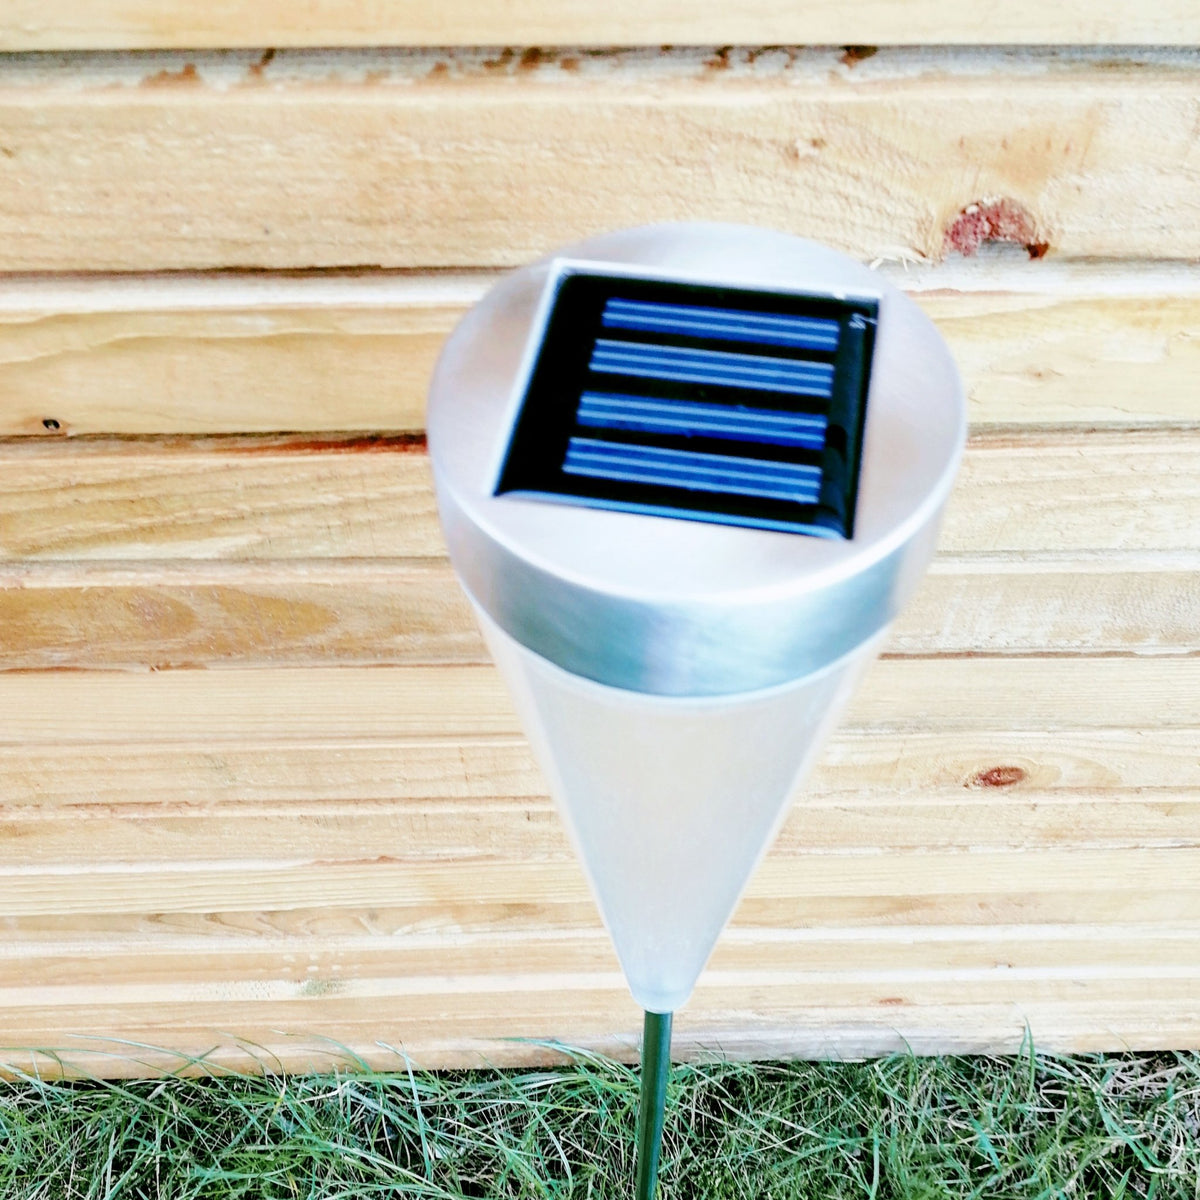 3 in 1 Colour Changing LED Solar Light - Cherish Home